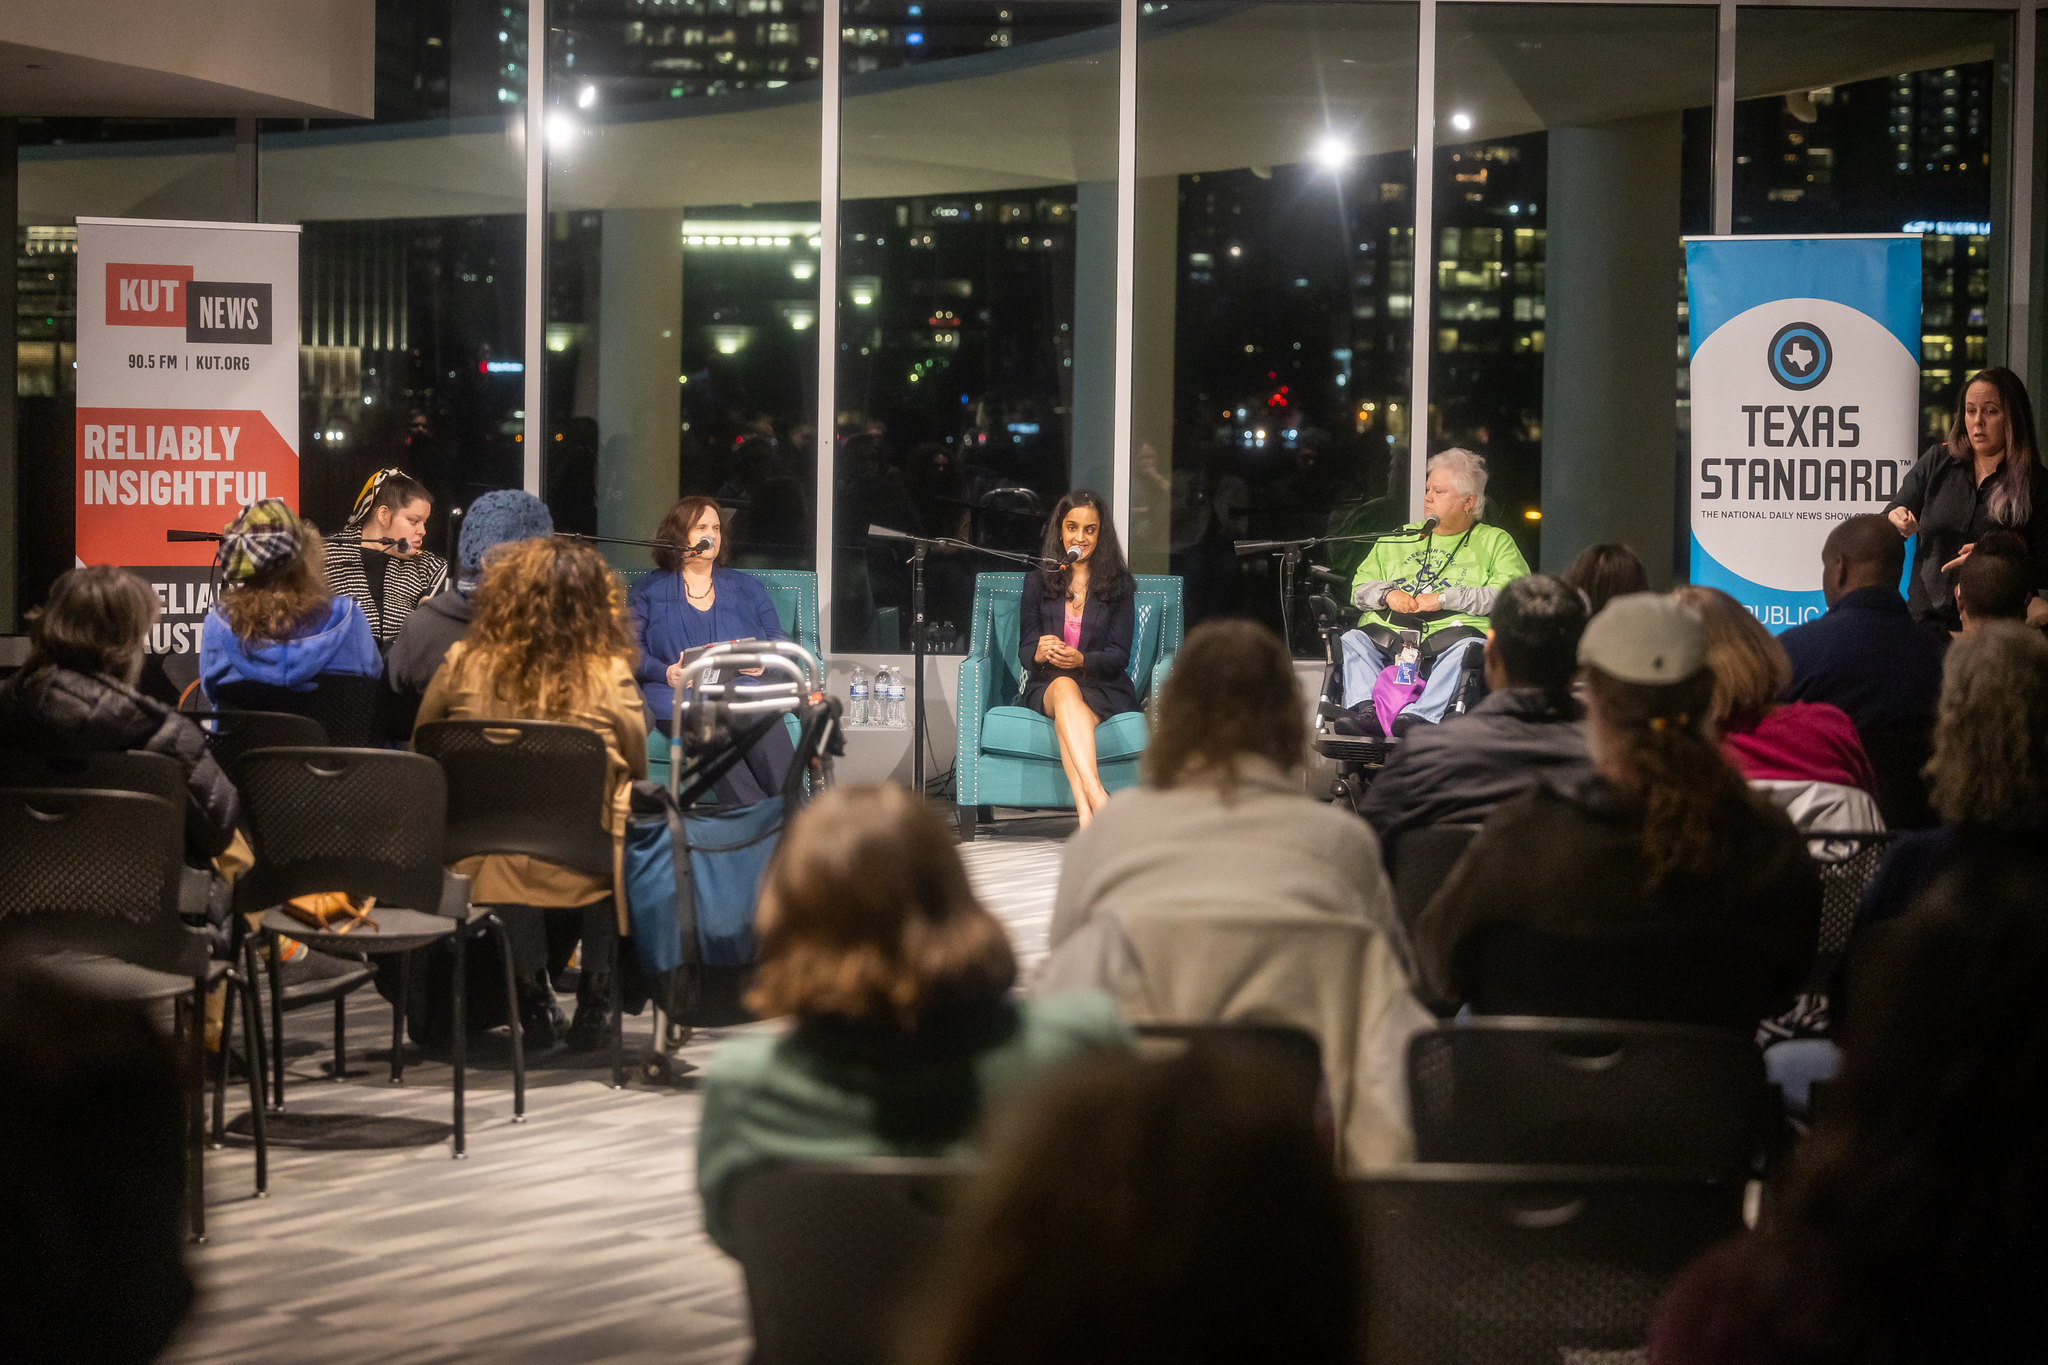 A photo of a room of people sitting in chairs and watching a panel of people at the front of a room. Behind the panelists are large windows that show city buildings lit up at night.